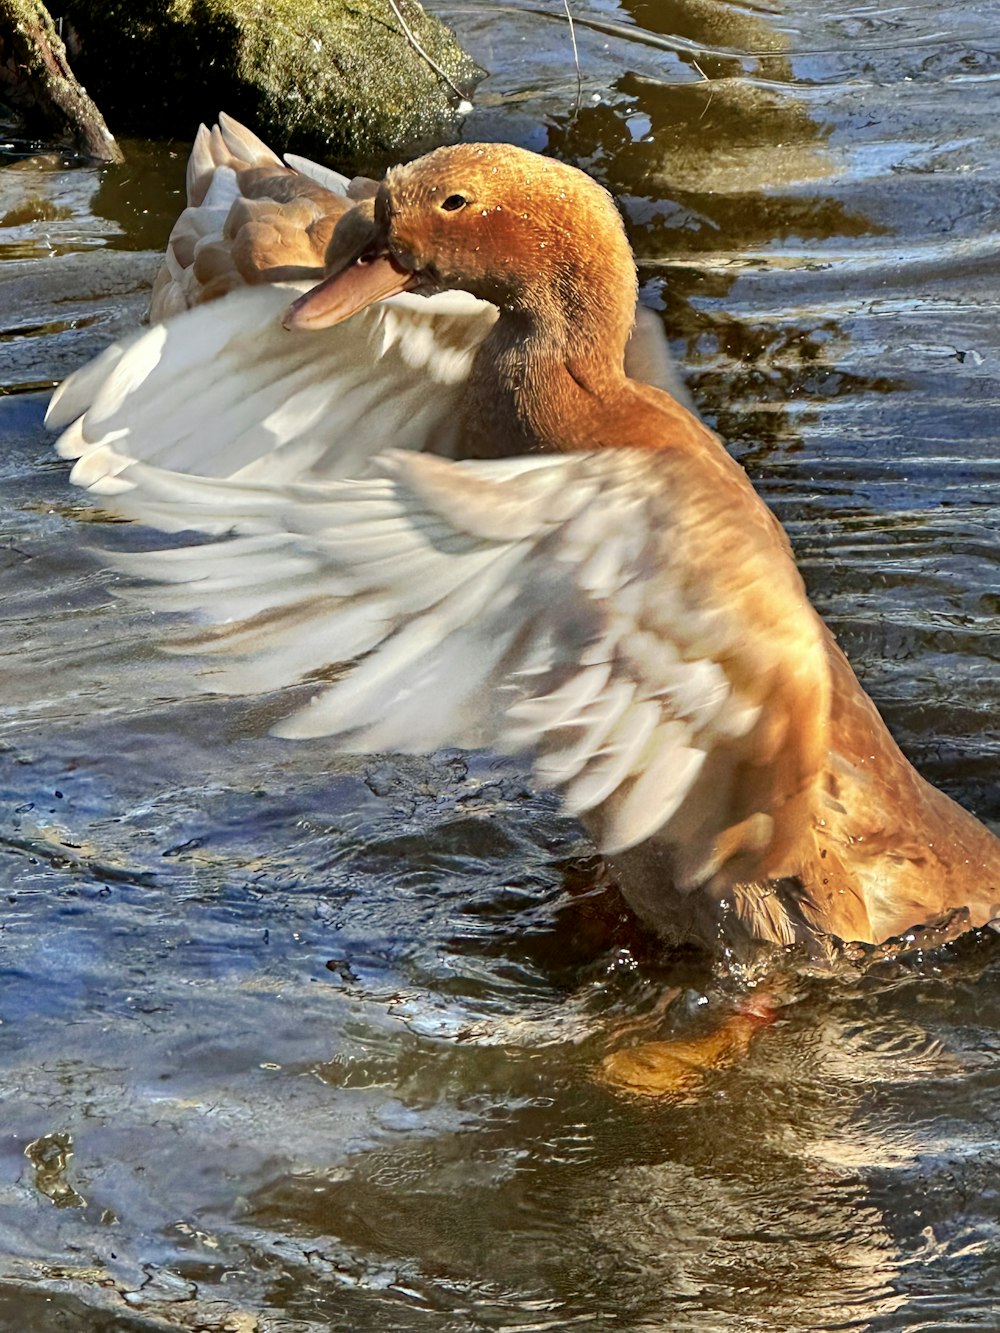 a duck flaps its wings in the water